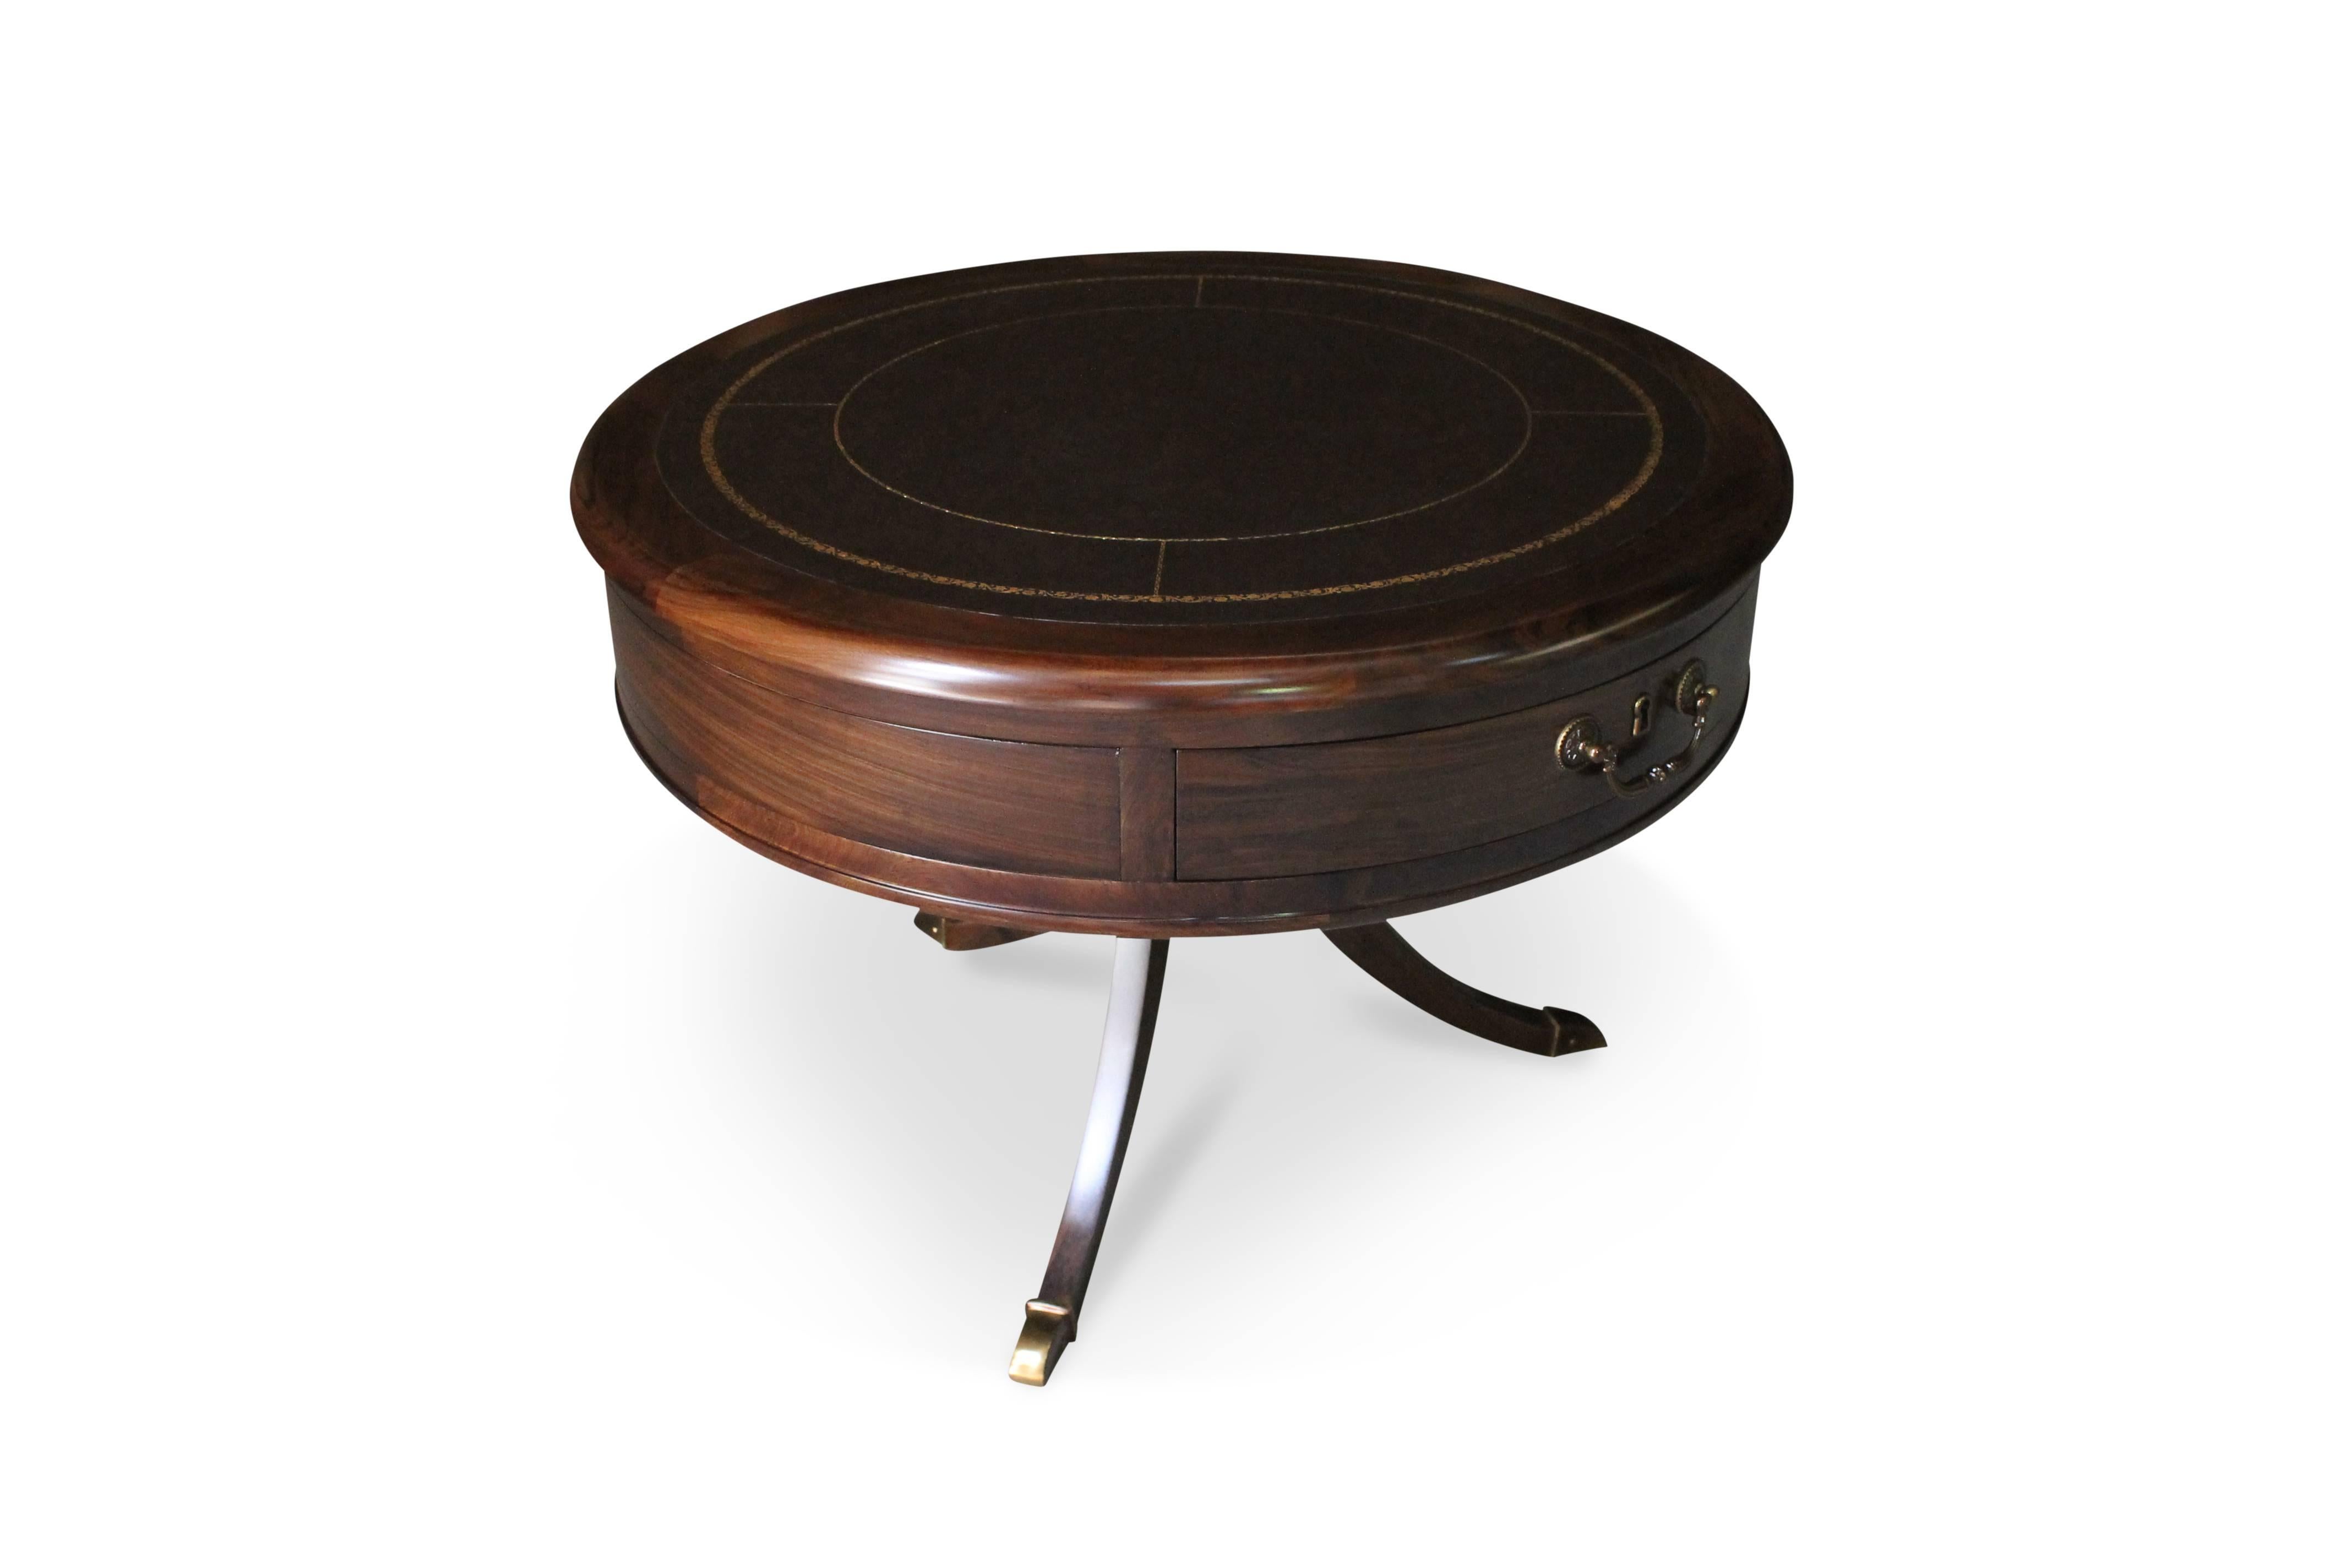 The Oriana Table features a classically-styled solid rosewood frame with a modern twist, featuring a leather top that is gold-leaf-embossed with a custom pattern.  Features bronze hardware and feet, two drawers, and an optional antique-style lock